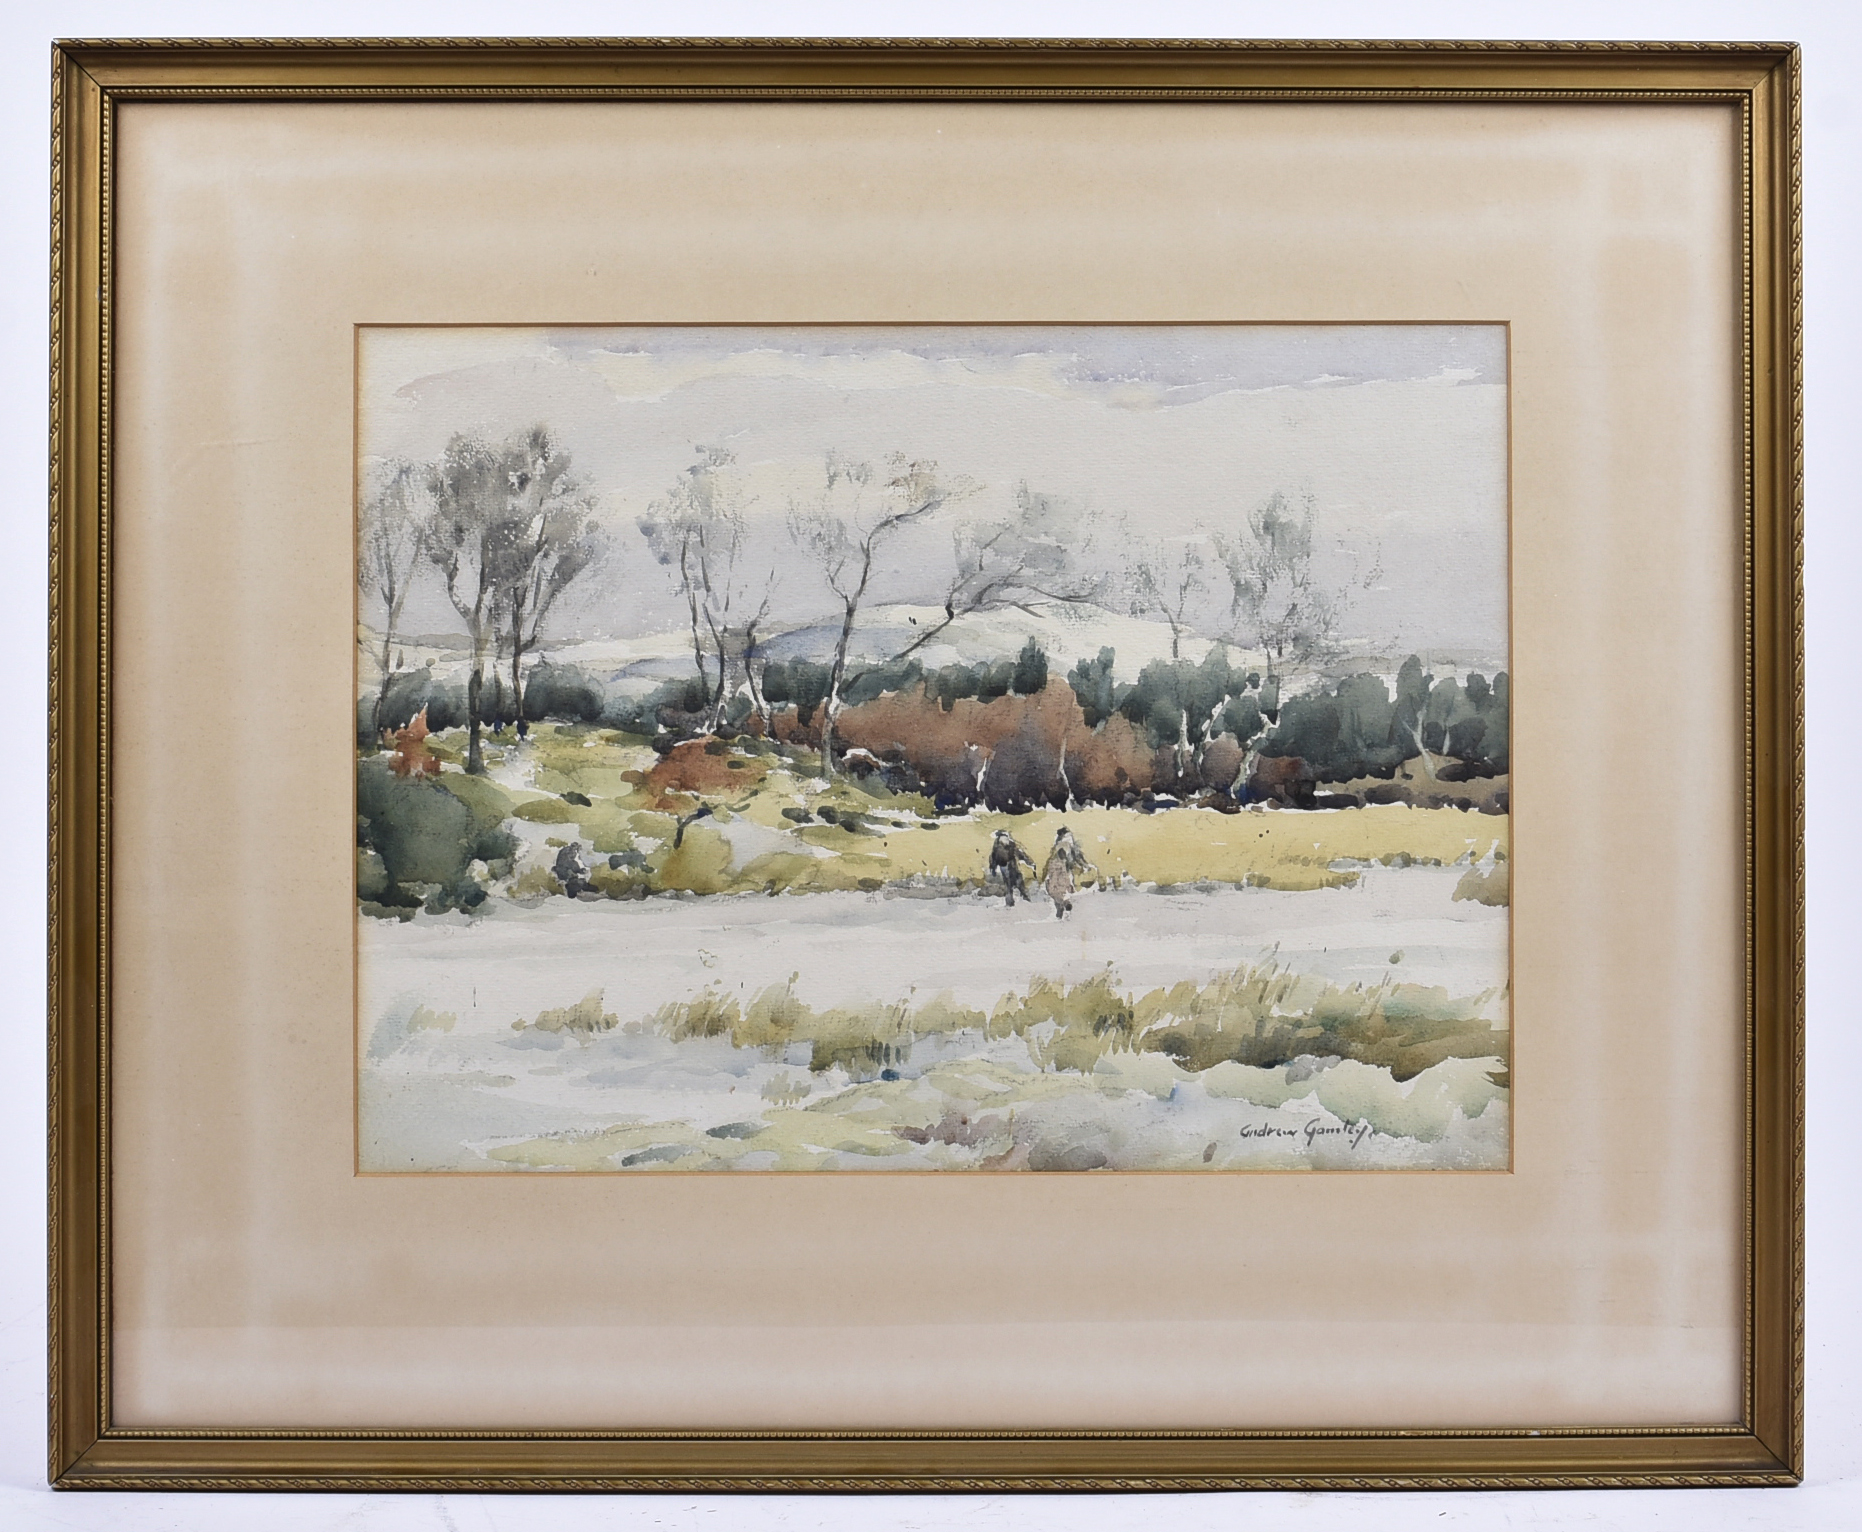 Andrew Archer Gamley RSW (1869-1949) watercolour on paper, 'Winter Landscape with Two Figures in the - Image 2 of 2